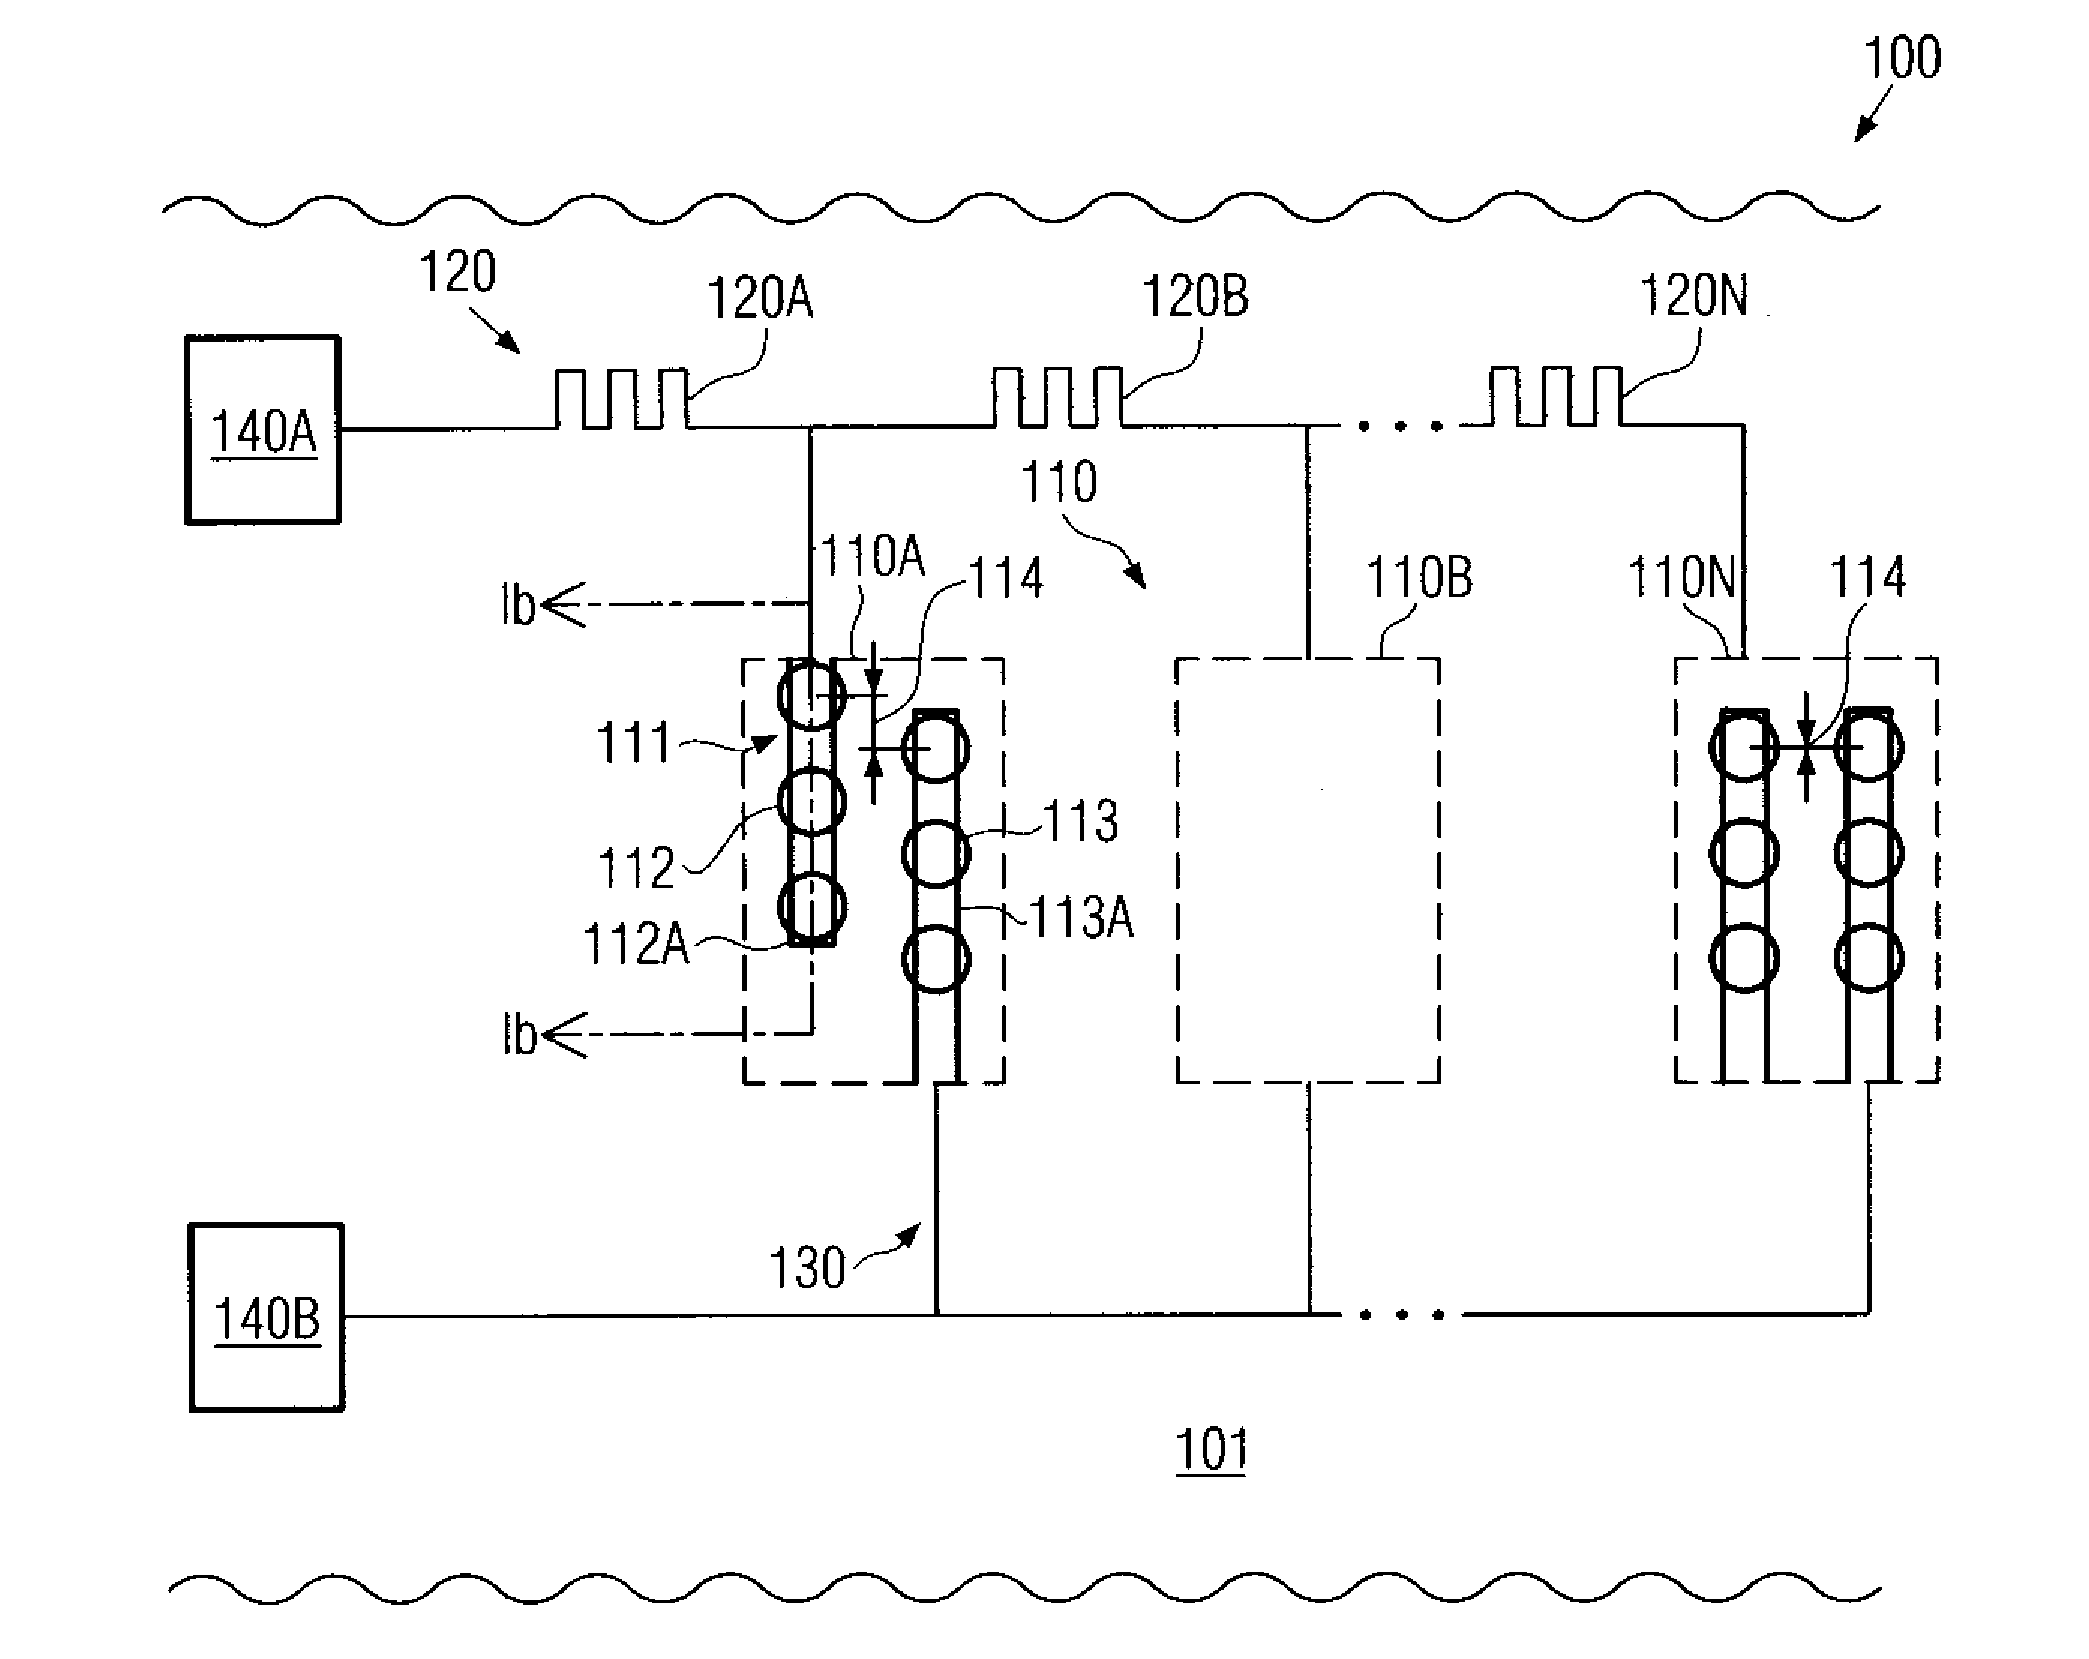 Test structure for monitoring leakage currents in a metallization layer